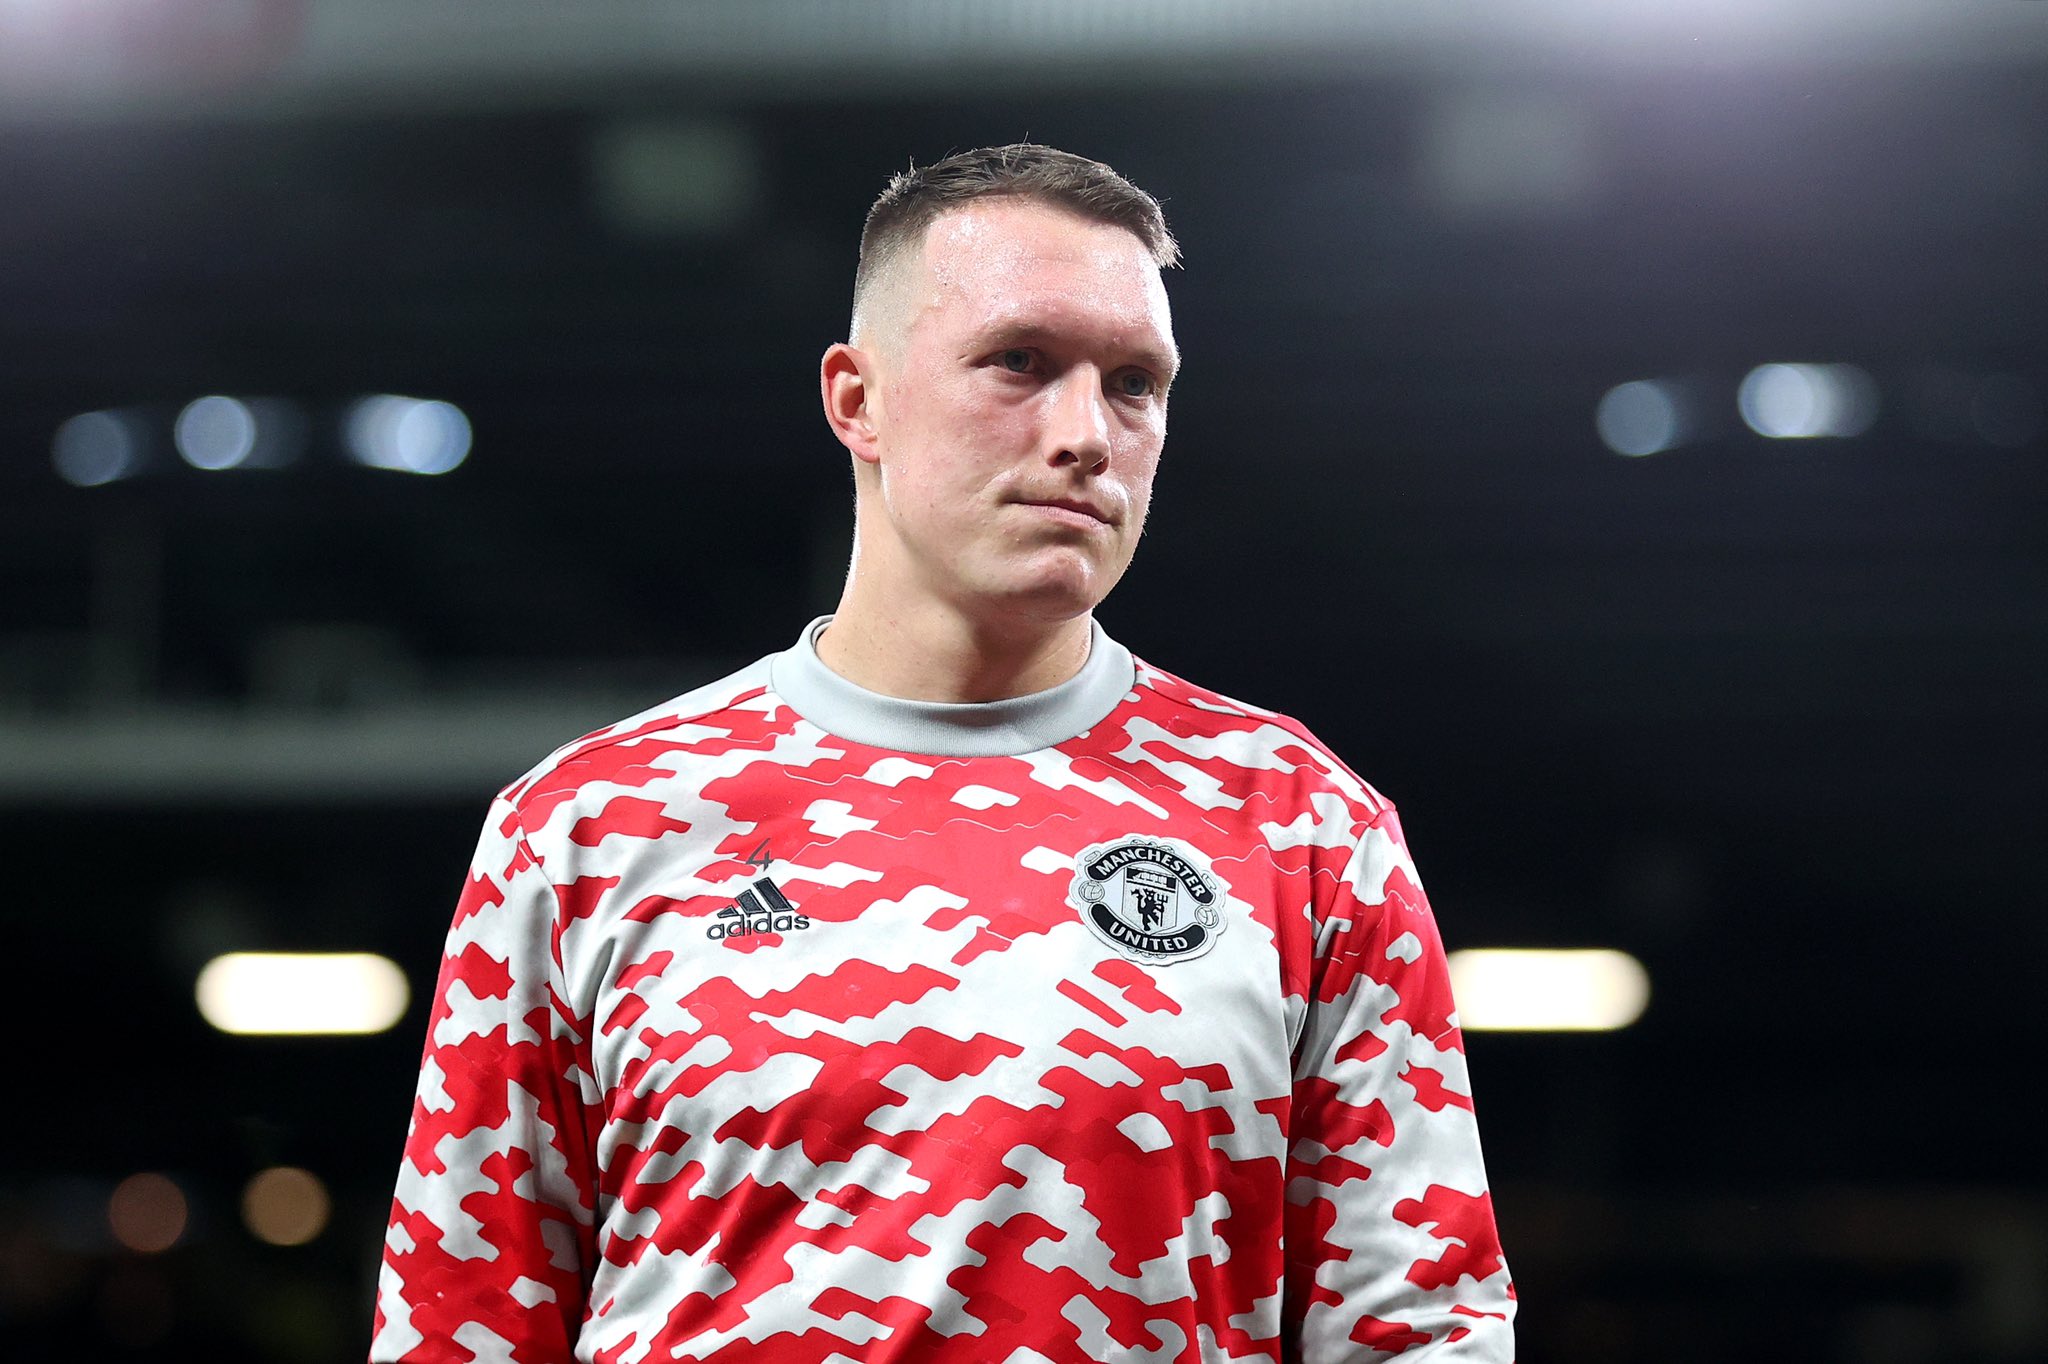 Everton and Crystal Palace Are In Talks With Man United to Sign Donny van de Beek ... While Bordeaux Are Confident To Sign Phil Jones